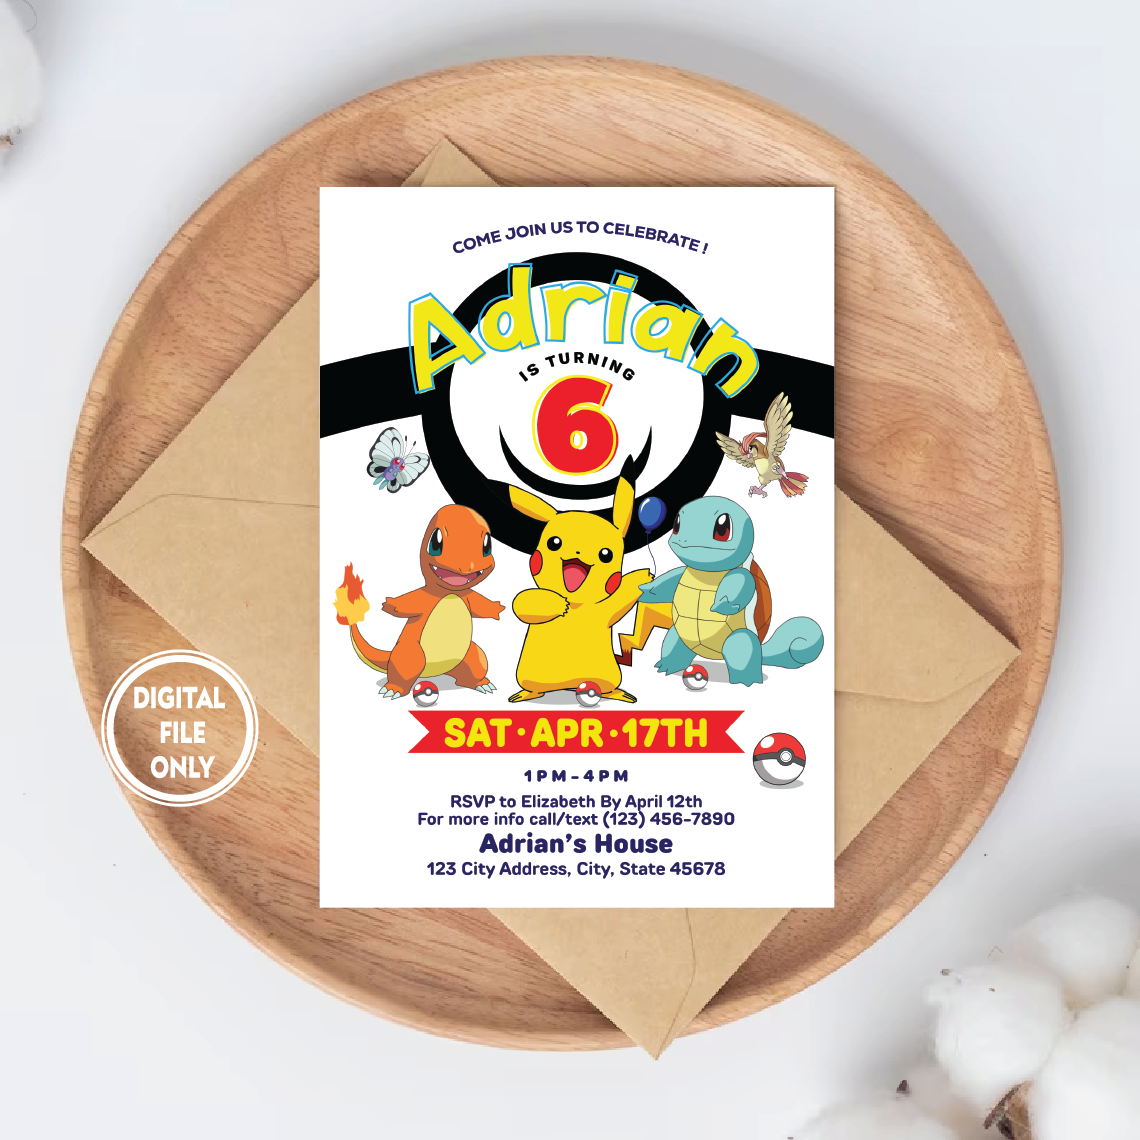 Personalized File Pikachu Birthday Invitation, Pokemon Invitation, Pokemon Birthday Invitation, Pokemon Invitation, Pikachu Invitation Invite PNG File Only